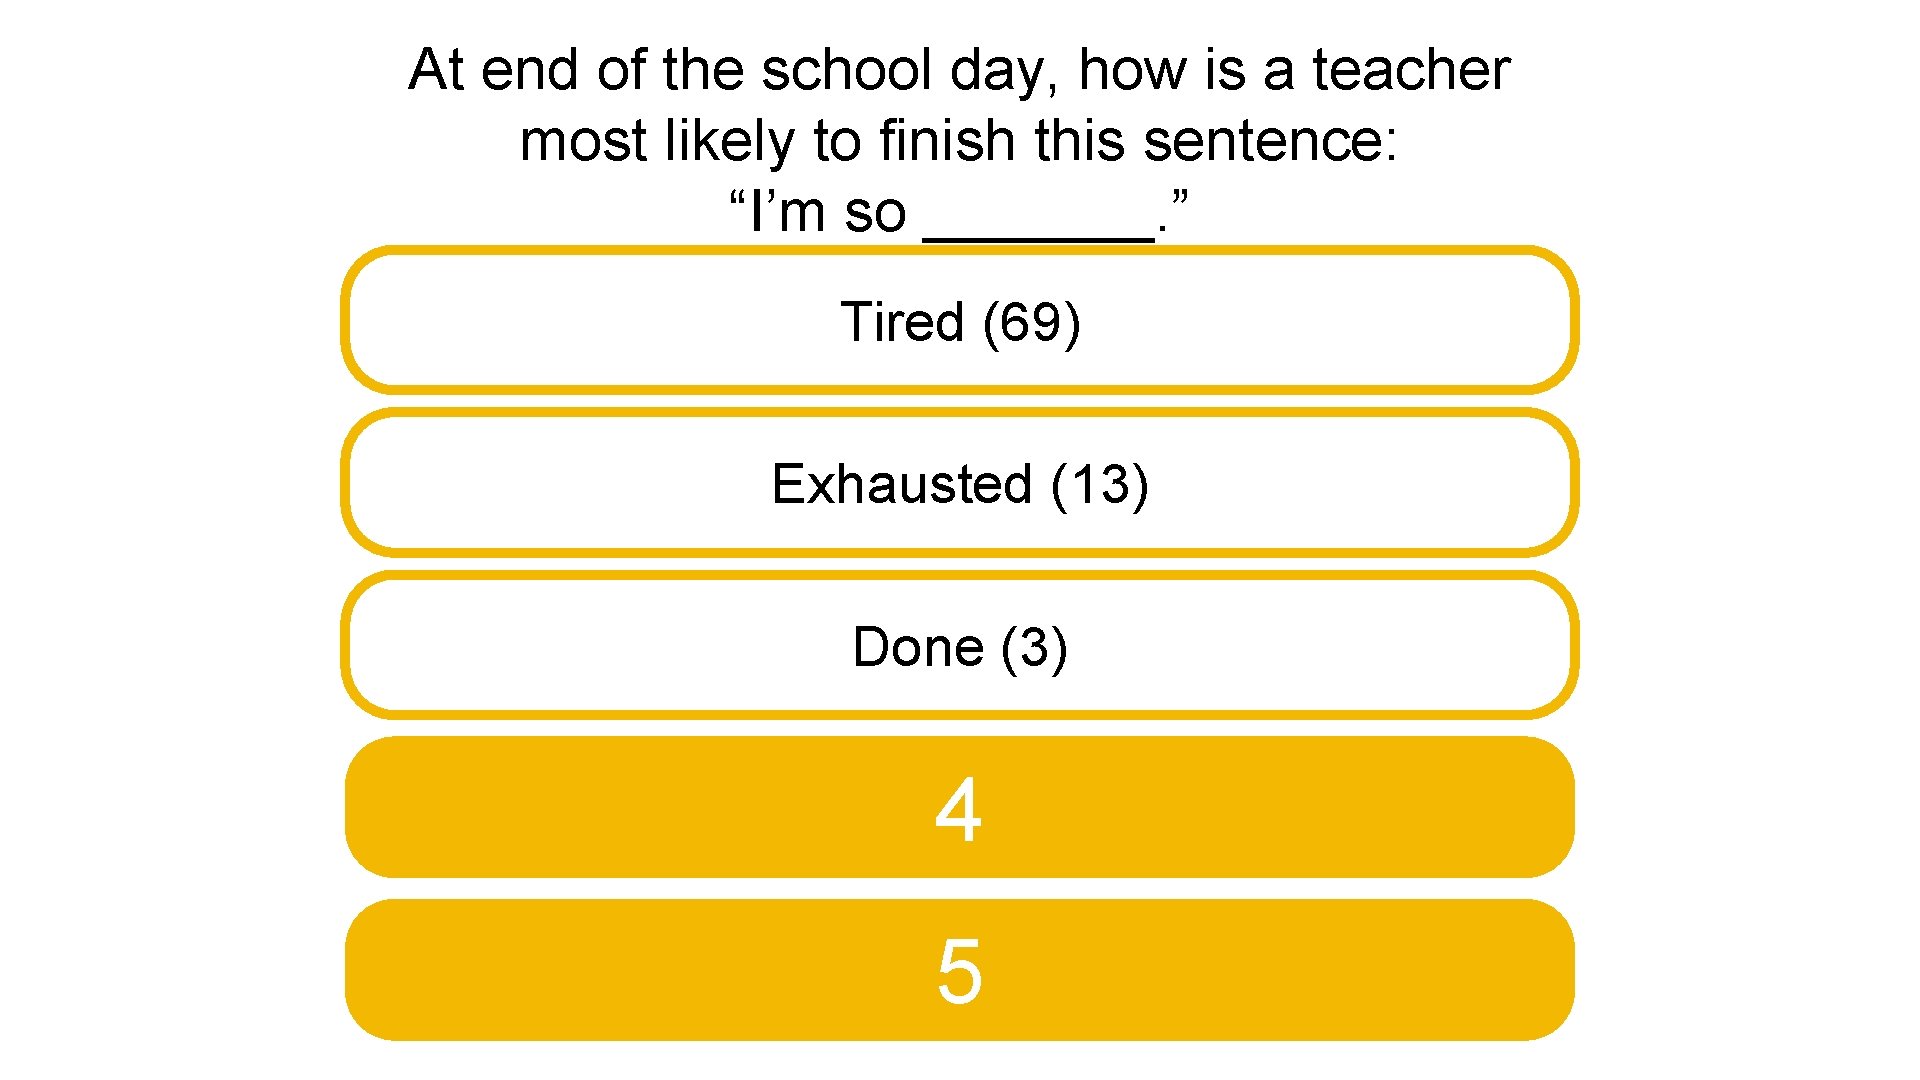 At end of the school day, how is a teacher most likely to finish